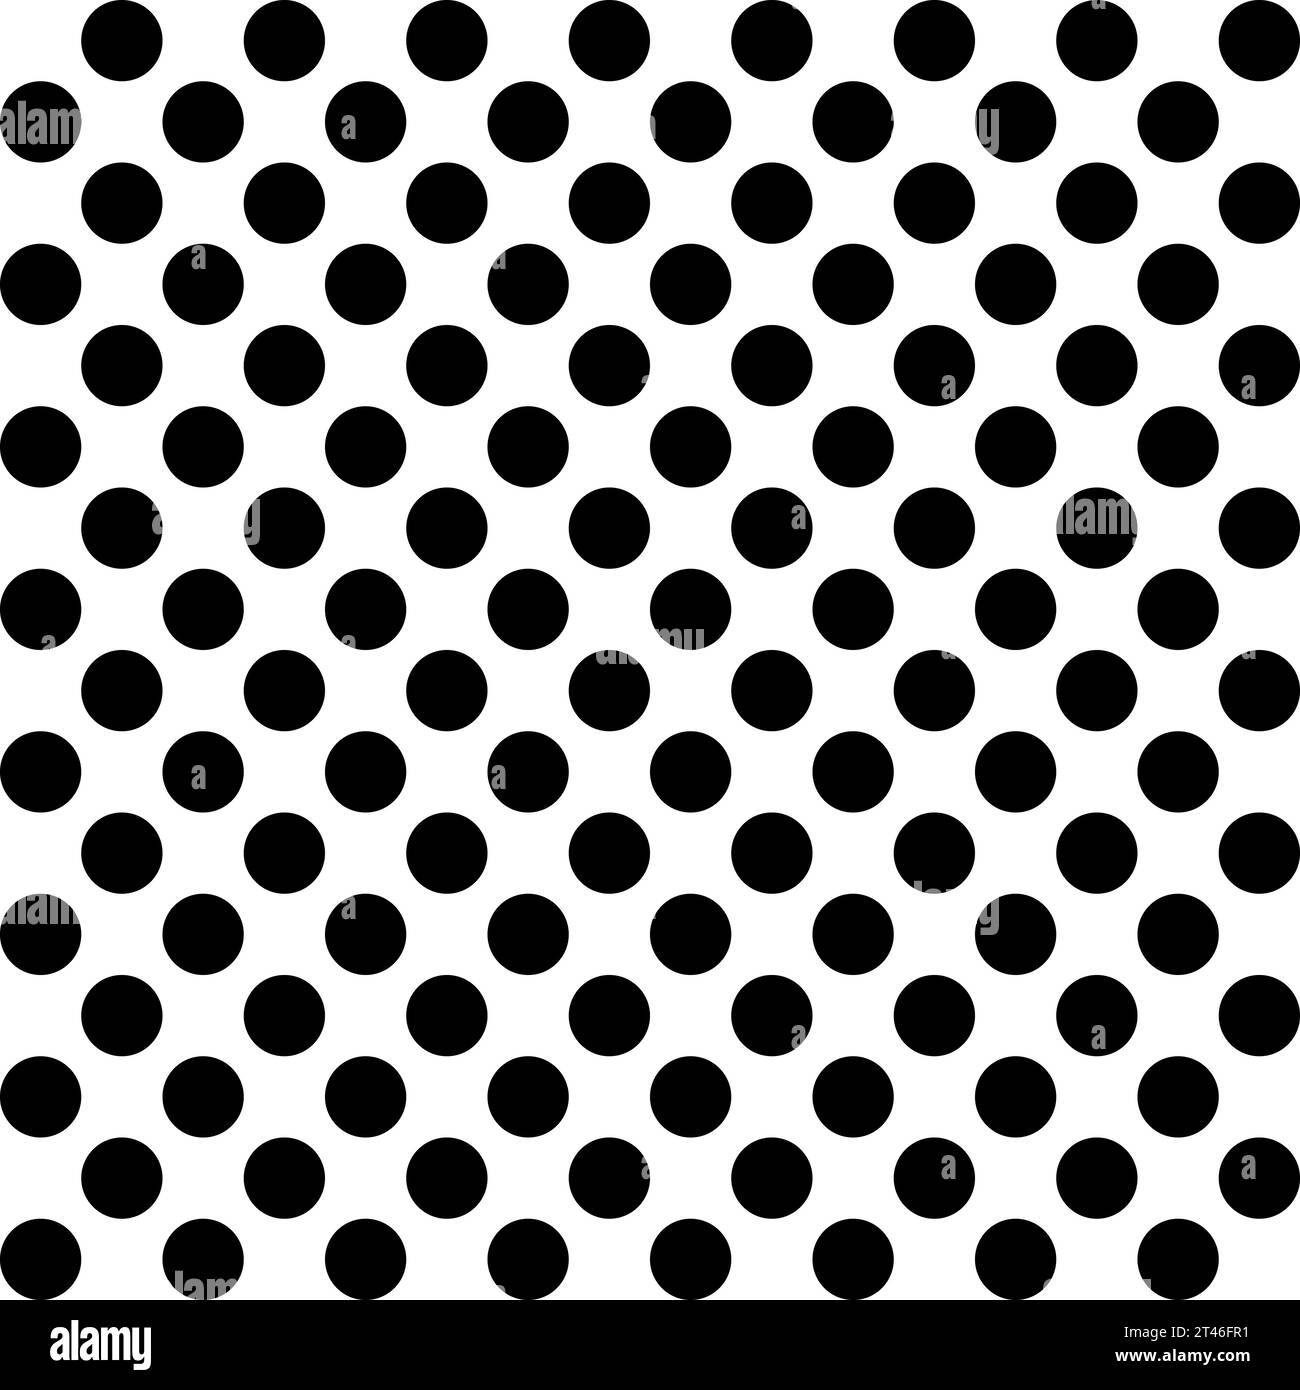 Black And White Polka Dots Images – Browse 70,922 Stock Photos